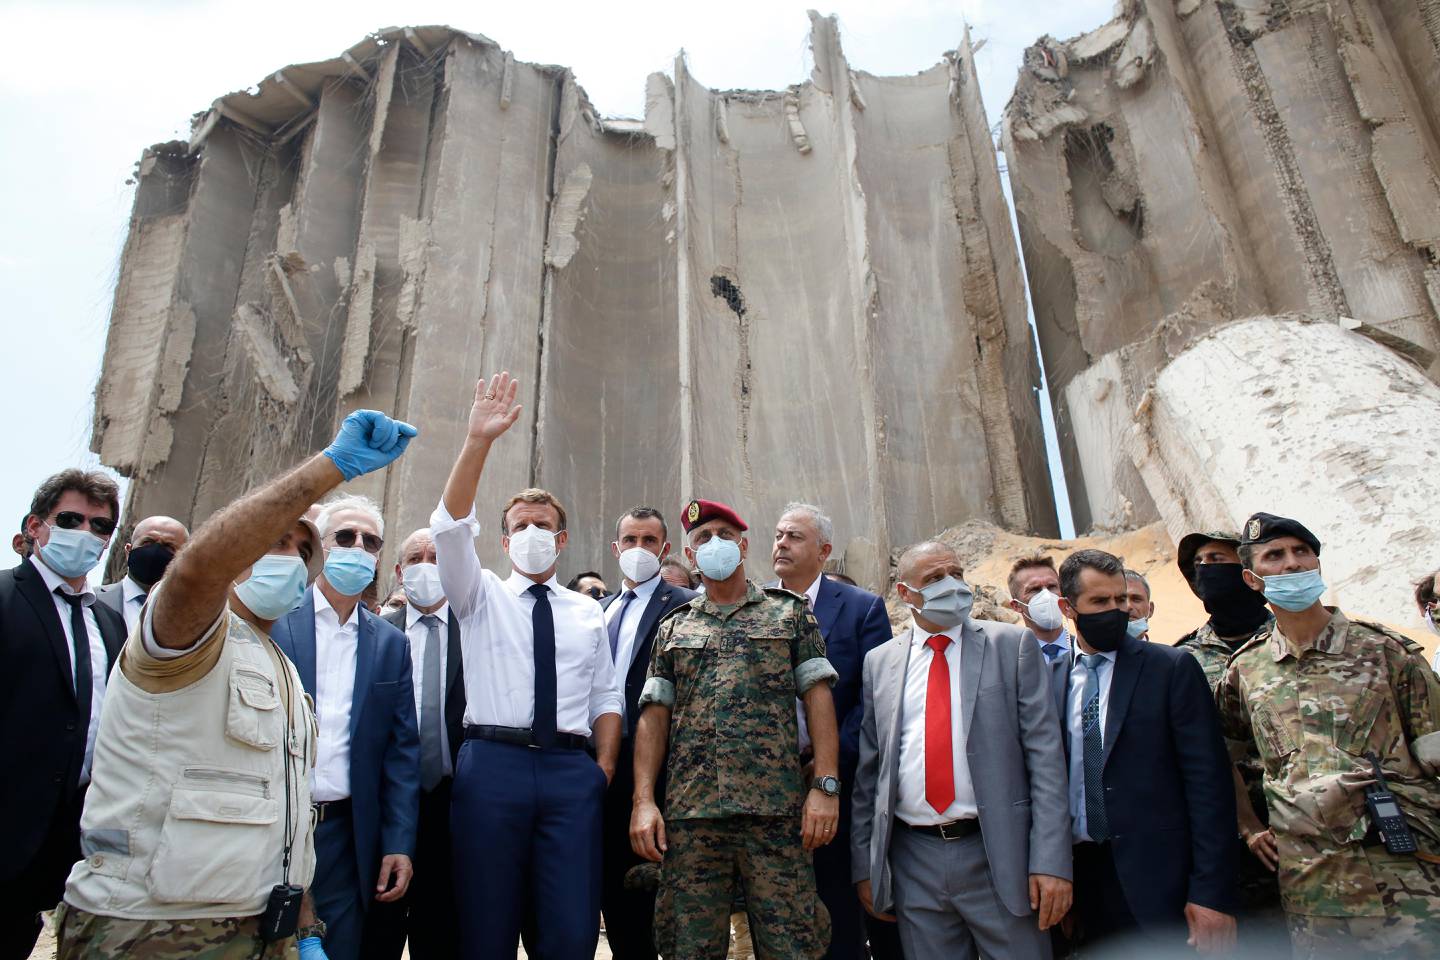 FILE - In this Aug. 6, 2020 file photo, French President Emmanuel Macron, center left, gestures as he visits the devastated site of the Aug. 4 explosion at the port of Beirut, Lebanon. An economic meltdown, a revolution, financial collapse, a virus outbreak and a cataclysmic explosion that virtually wiped out the country's main port. The past year has been nothing short of an earthquake for tiny Lebanon, with an economic meltdown, mass protests, financial collapse, a virus outbreak and a cataclysmic explosion that virtually wiped out the countrys main port. Yet Lebanese fear even darker days are ahead. (AP Photo/Thibault Camus, Pool, File)